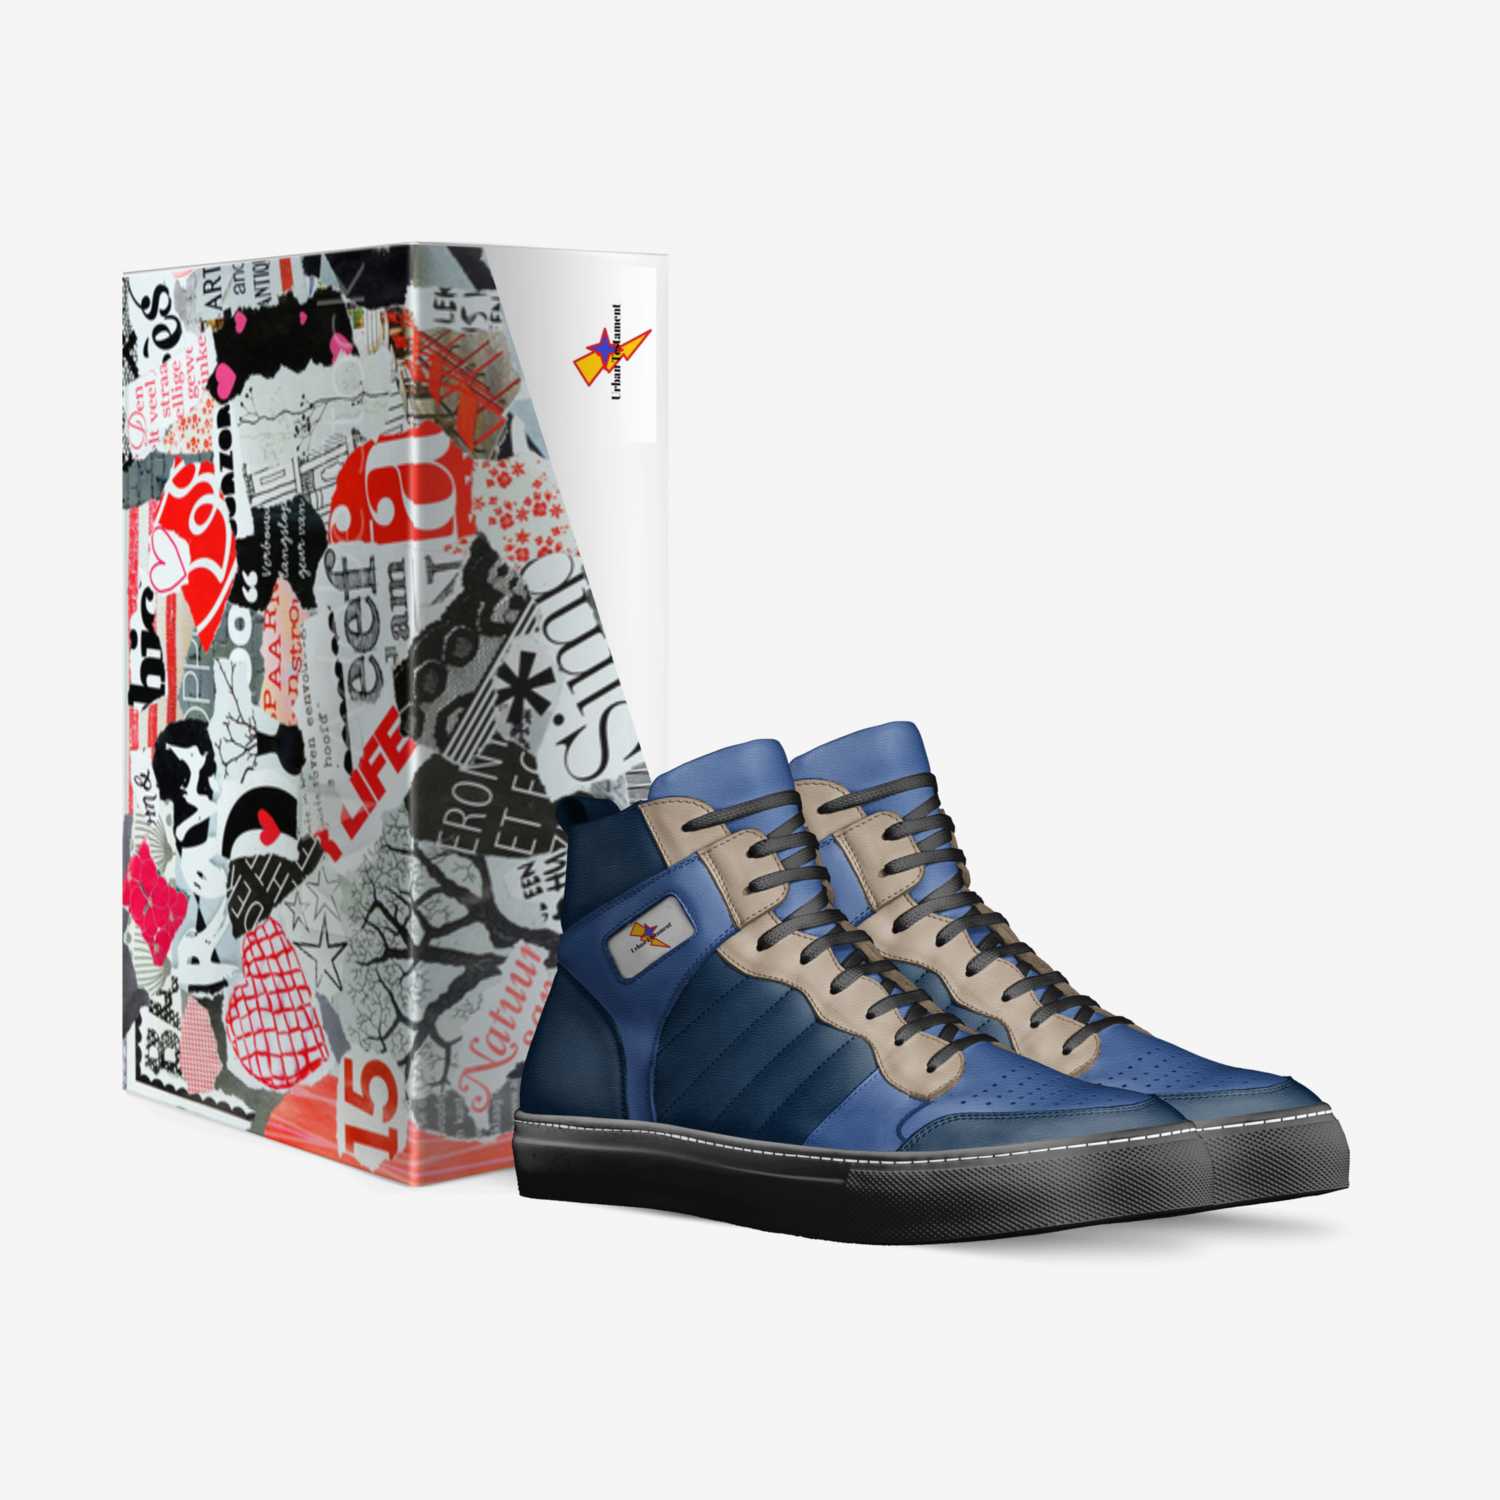 Urban Testament custom made in Italy shoes by Edward Molina | Box view